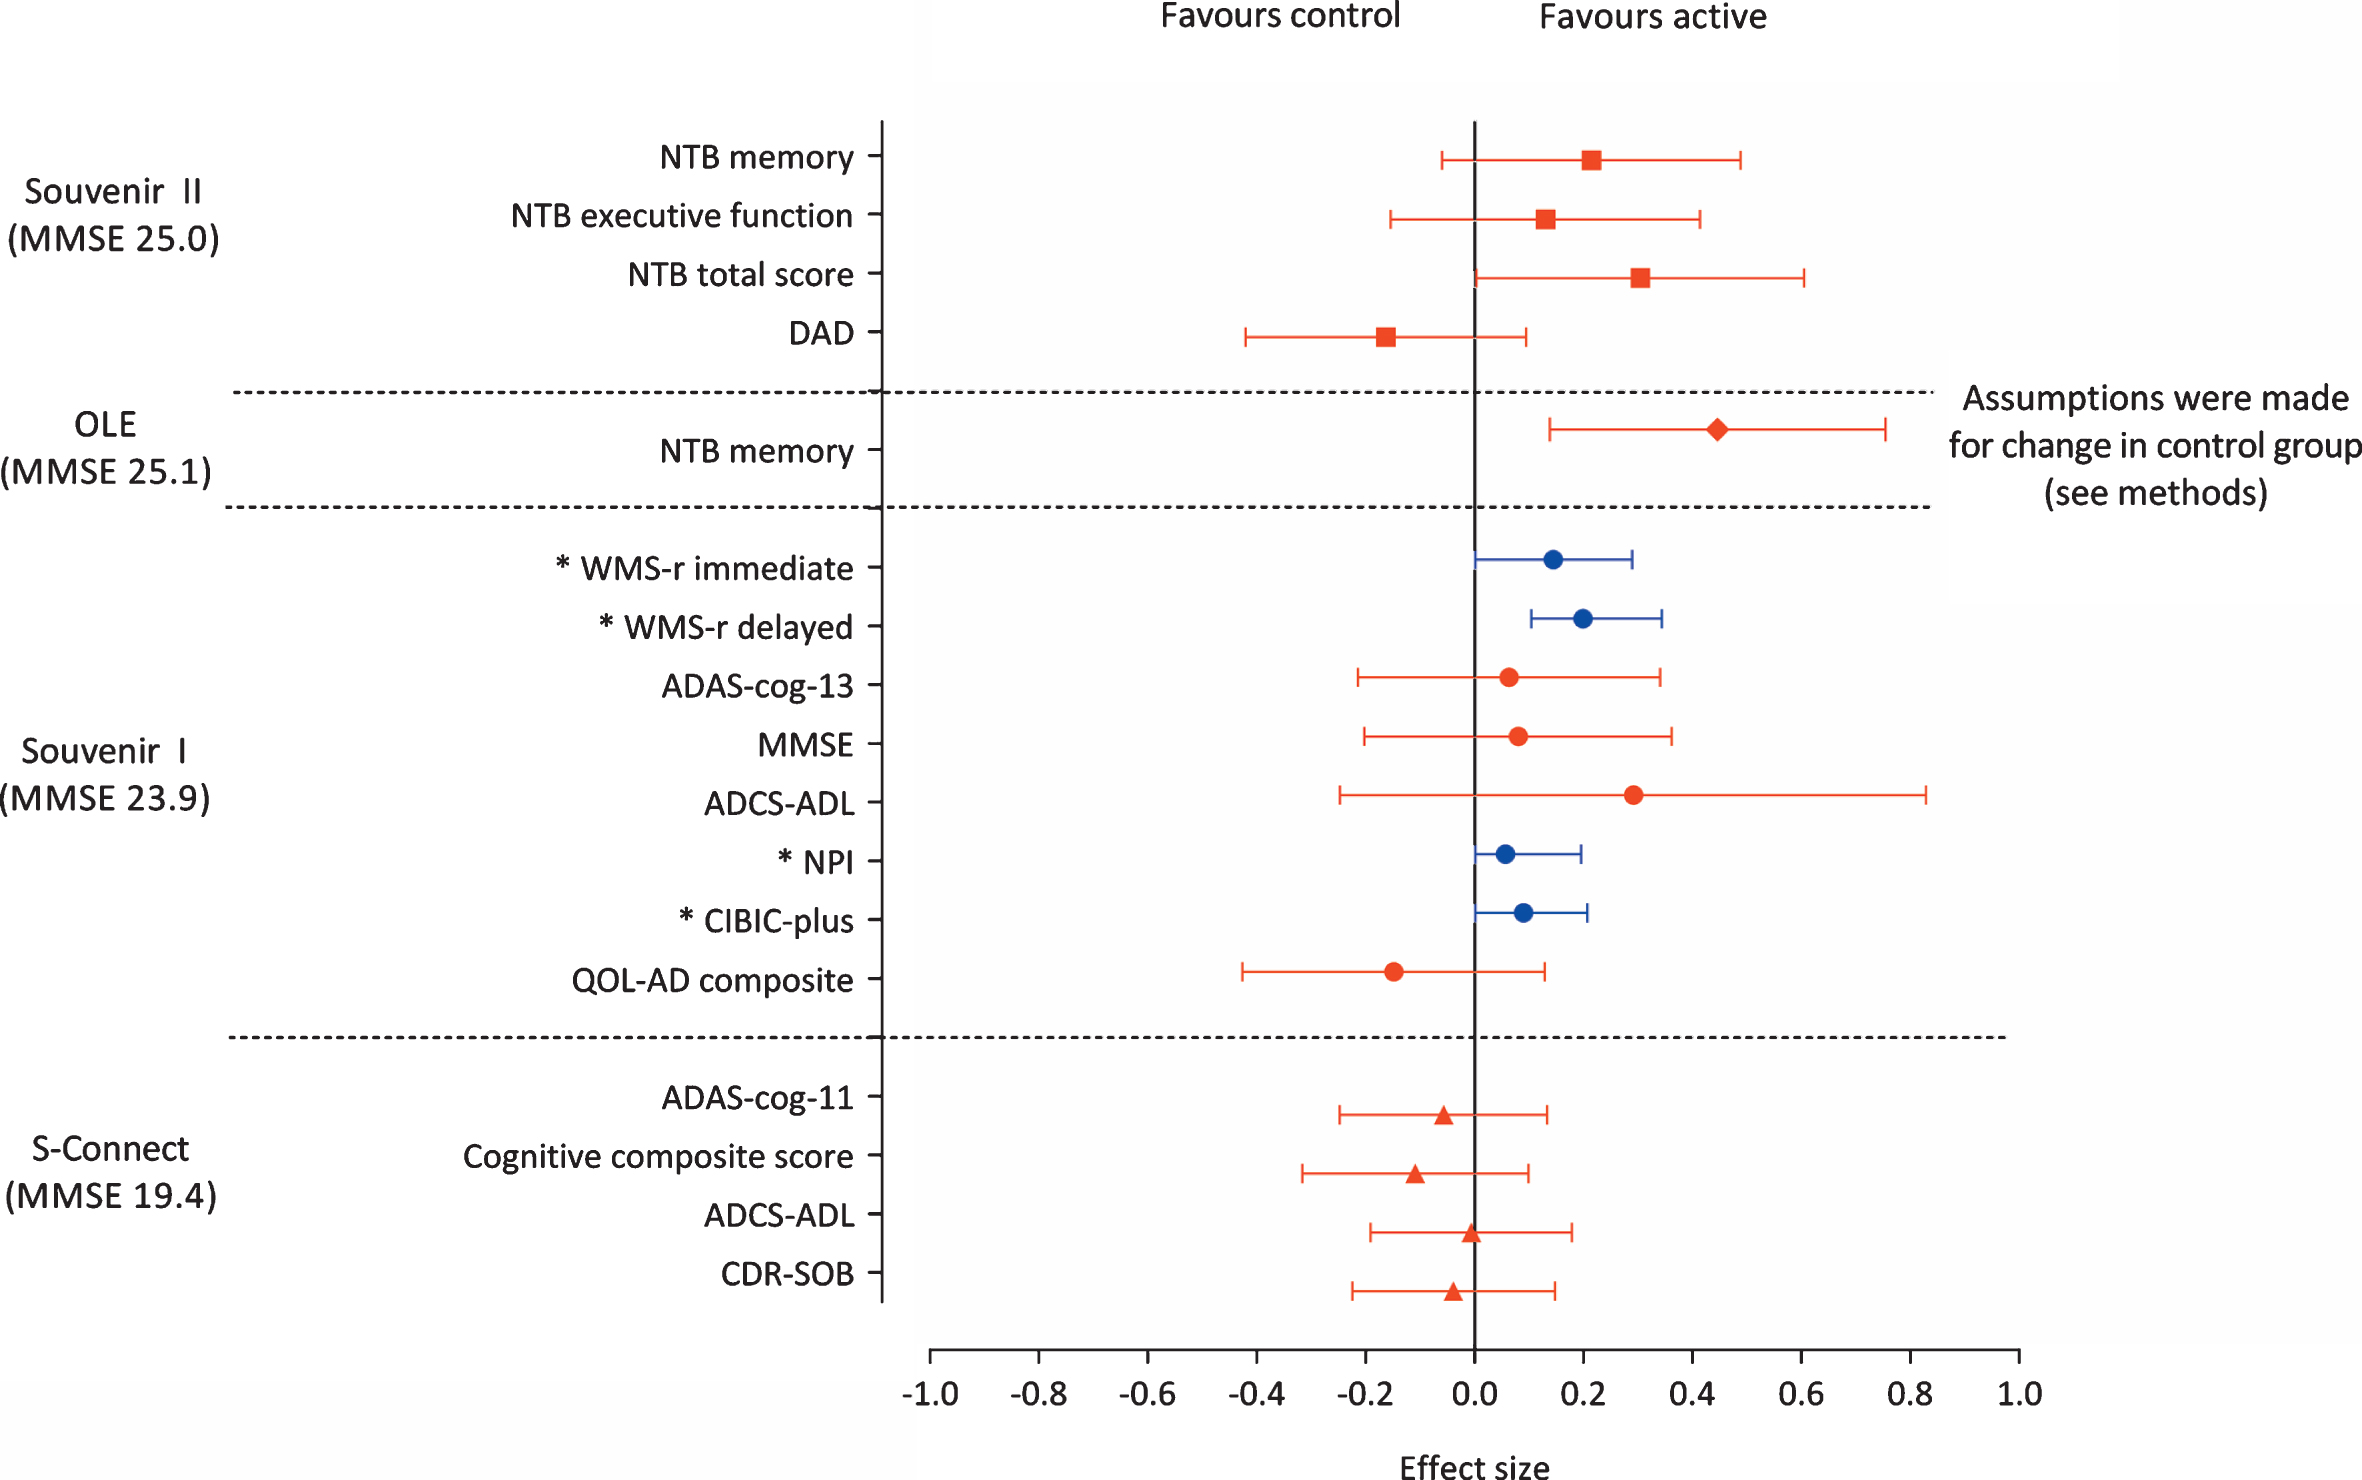 Effect sizes (point estimate and 95% CI) for the main primary and secondary outcome measures in the Souvenir I (•), Souvenir II (■), open-label extension (OLE) (♦), and S-Connect (▴) studies in patients with mild and mild to moderate Alzheimer’s disease. Mean baseline values of the Mini-Mental State Examination (MMSE) score of the total study populations are shown in the figure. Effect sizes were calculated using Cohen’s d [18] (red) for change from baseline values, except for CIBIC-plus (values at week 12 were used), and Cramér’s V [19] (blue) for nominal data. Cohen’s d values range from –∞ to +∞, with a positive effect size indicating improvement in the active (Souvenaid) group versus control and vice versa. Cramér’s V values range from 0 (no association) to 1 (perfect association).